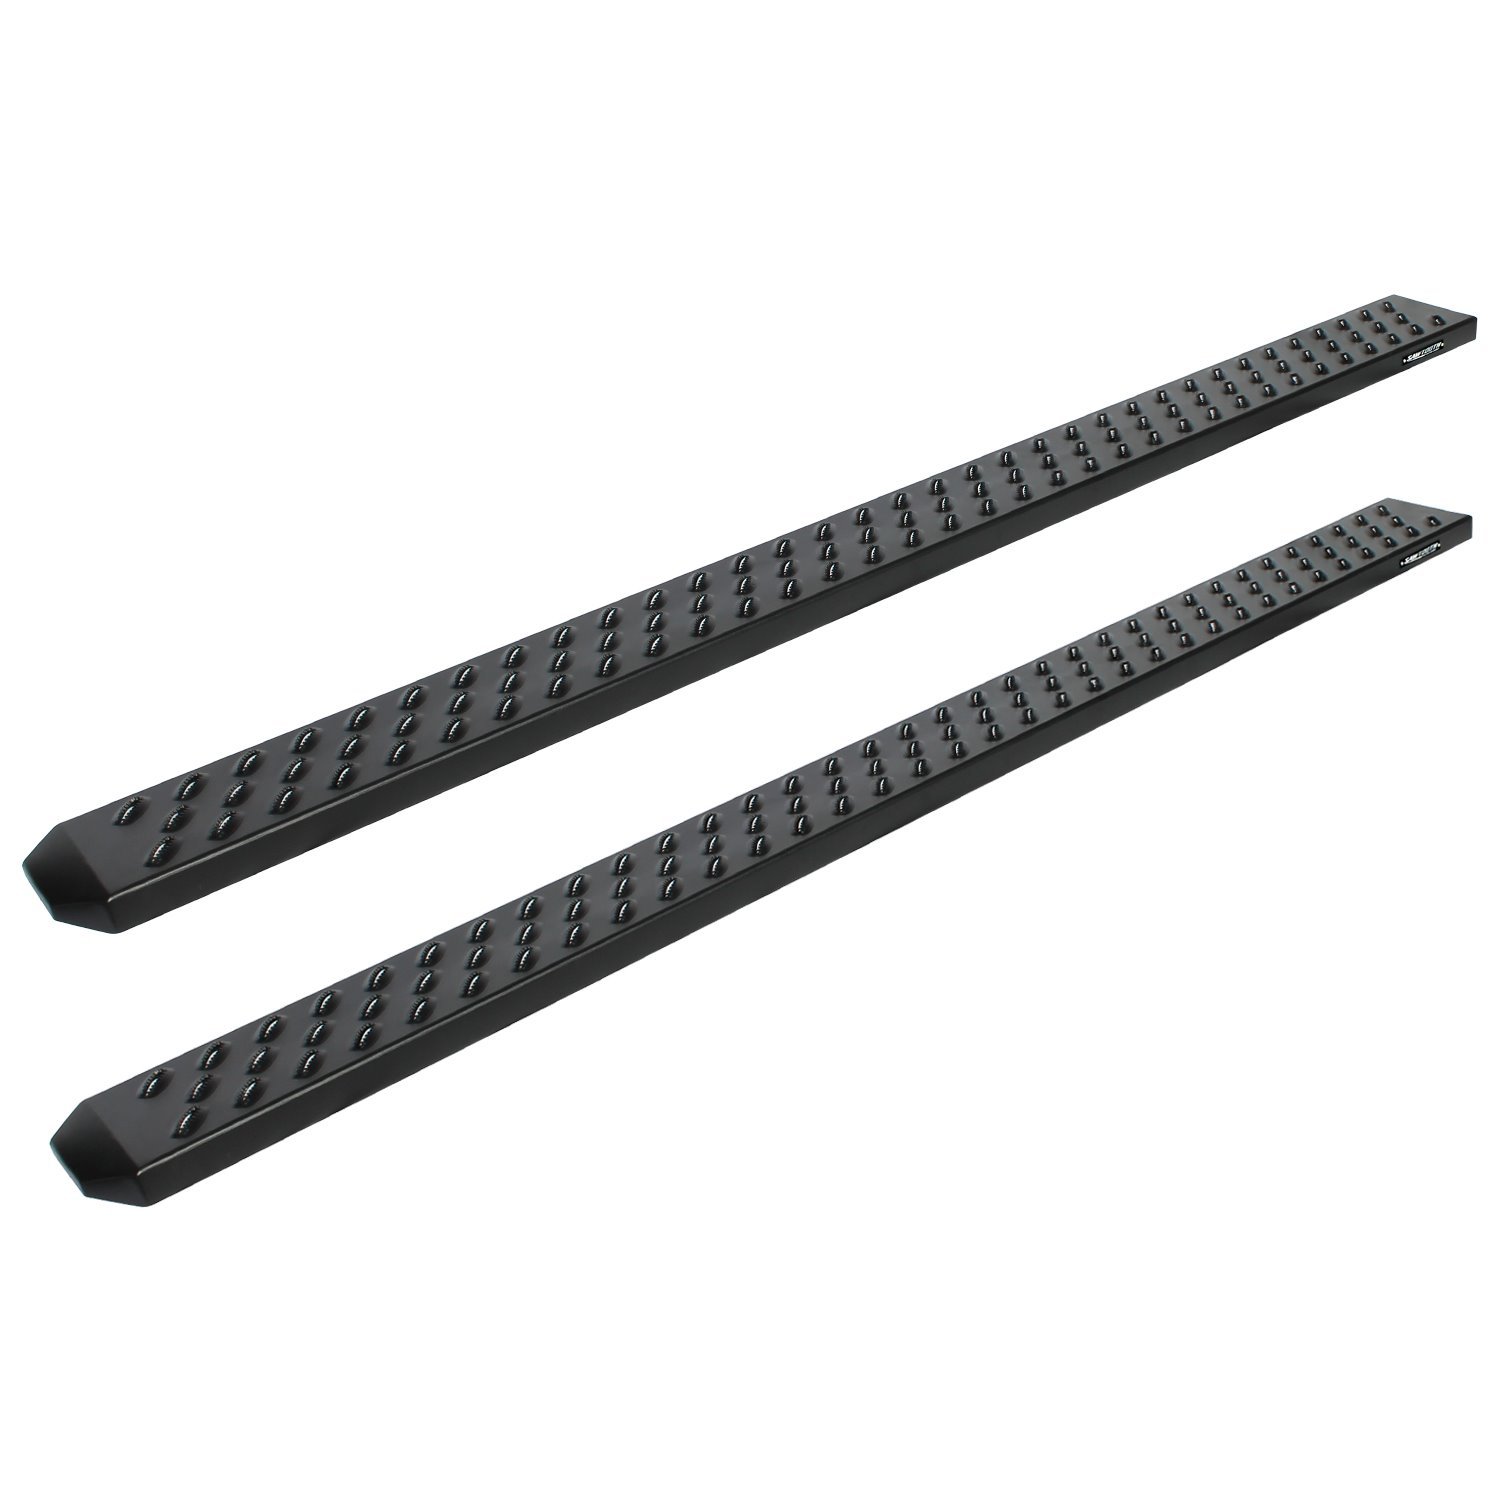 2107-0589BT Raptor Series 6.5 in Sawtooth Slide Track Running Boards, Black Aluminum, Fits Select Nissan Frontier Crew Cab